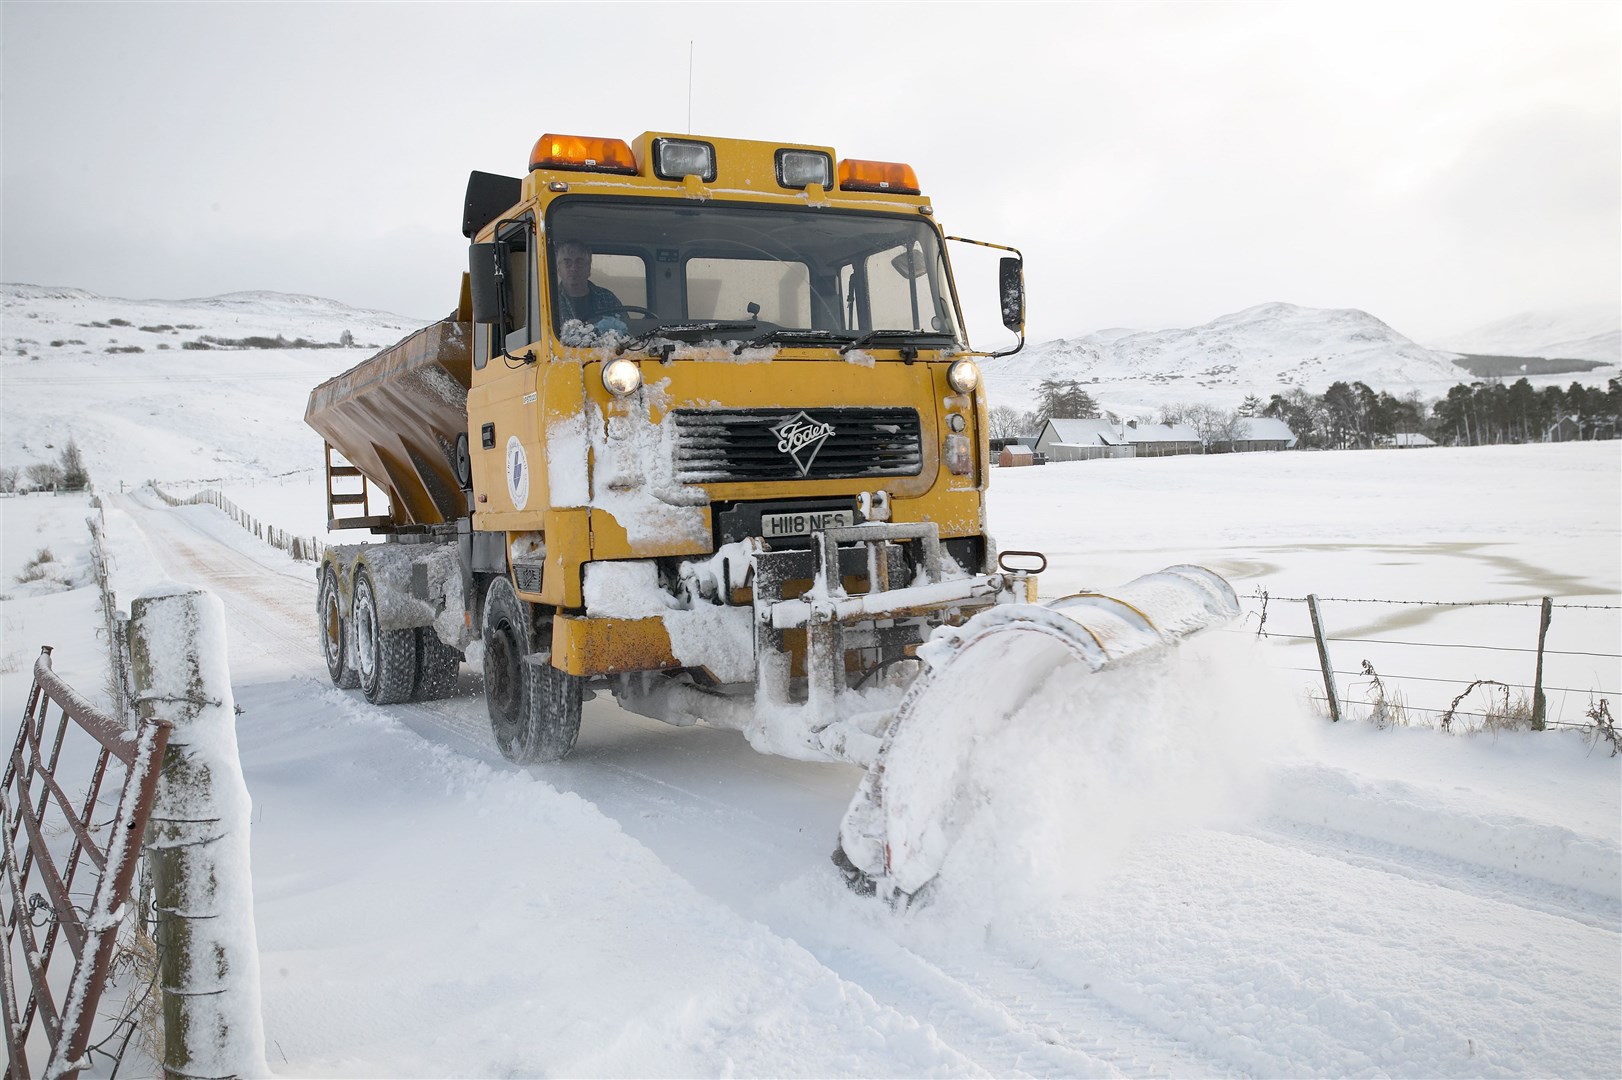 Snow plough in action in The Highlands.